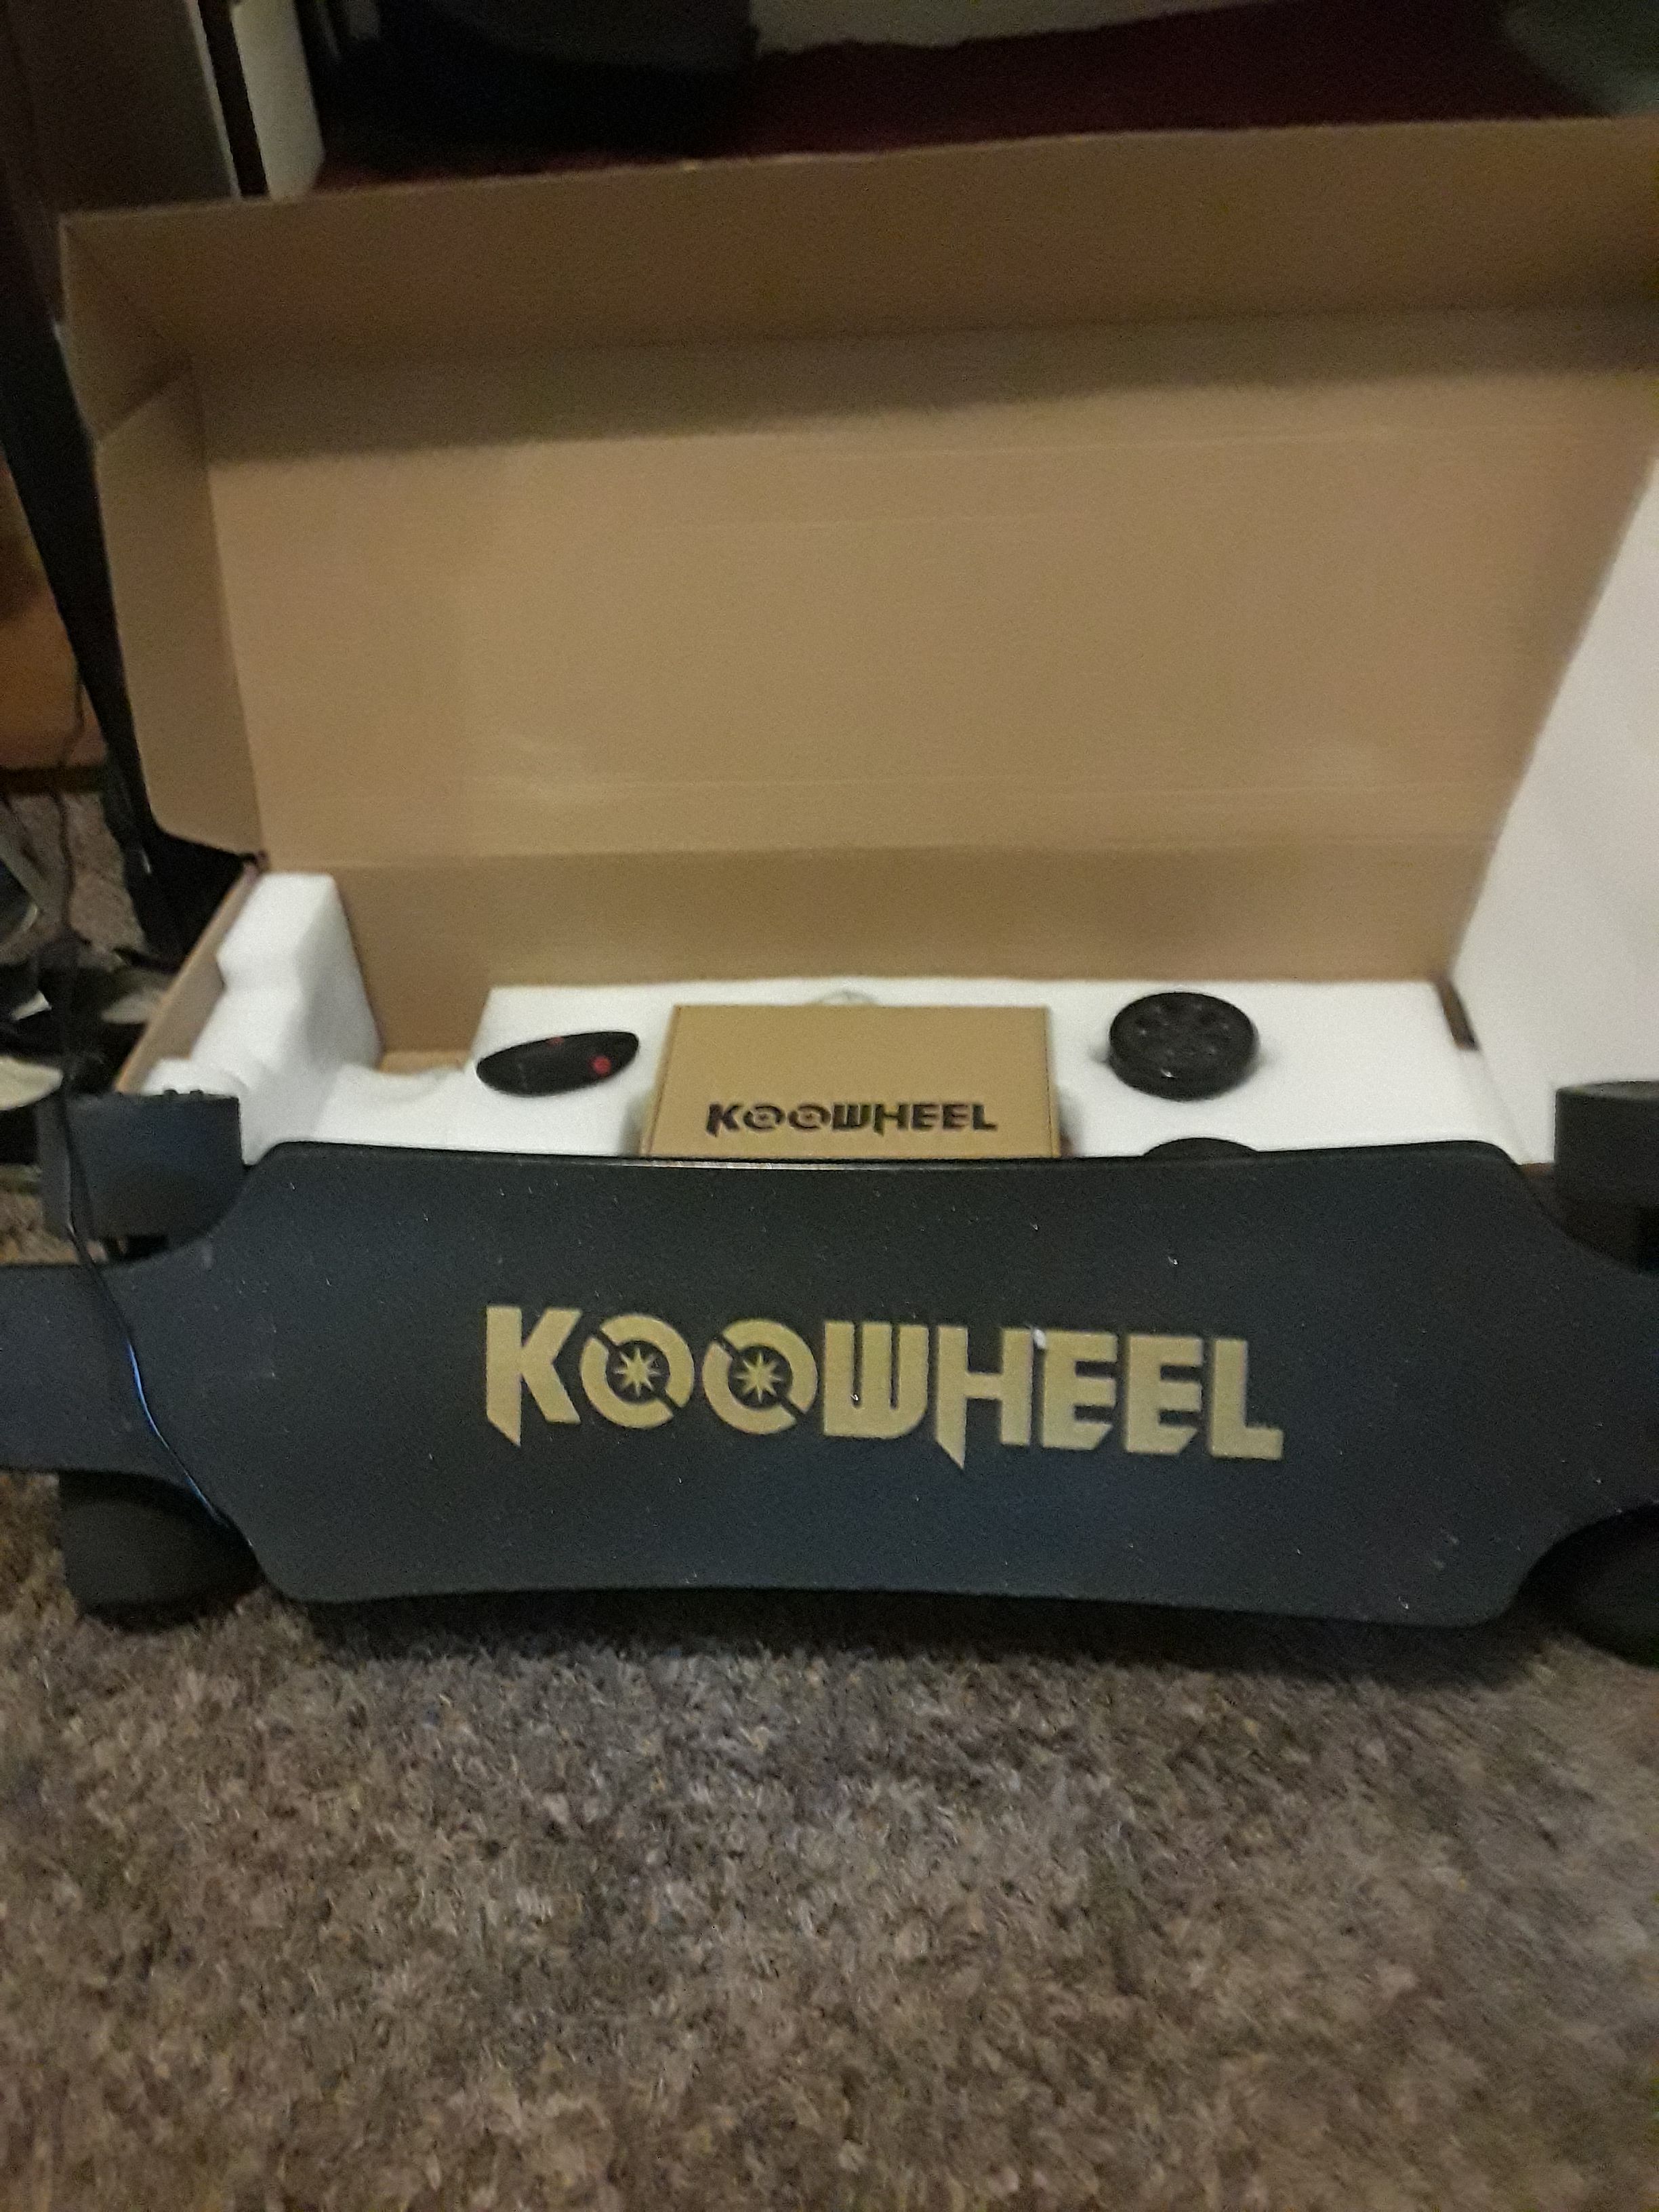 Koolwheel electric skateboard Really nice $400 obo. It goes 20 plus m.p.h.! Drop an offer u never know.